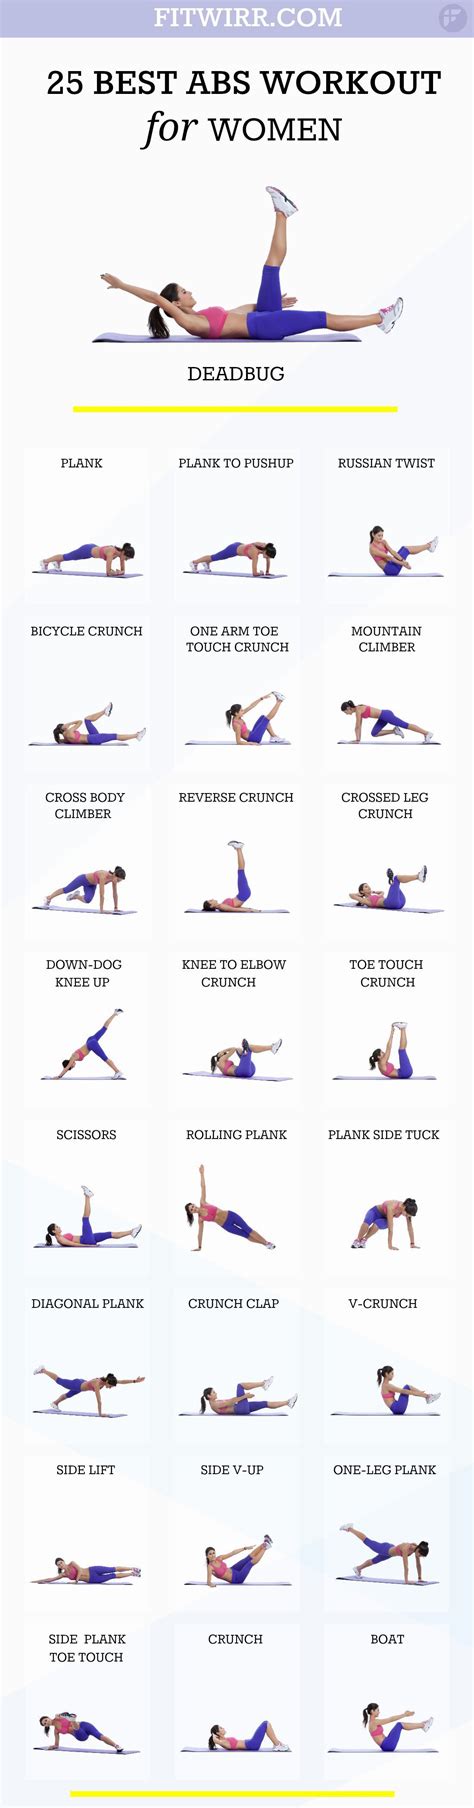 Flat Abs Workout Challenges â 5 Best Abs Infographics Abs Workout Abs Workout For Women Best